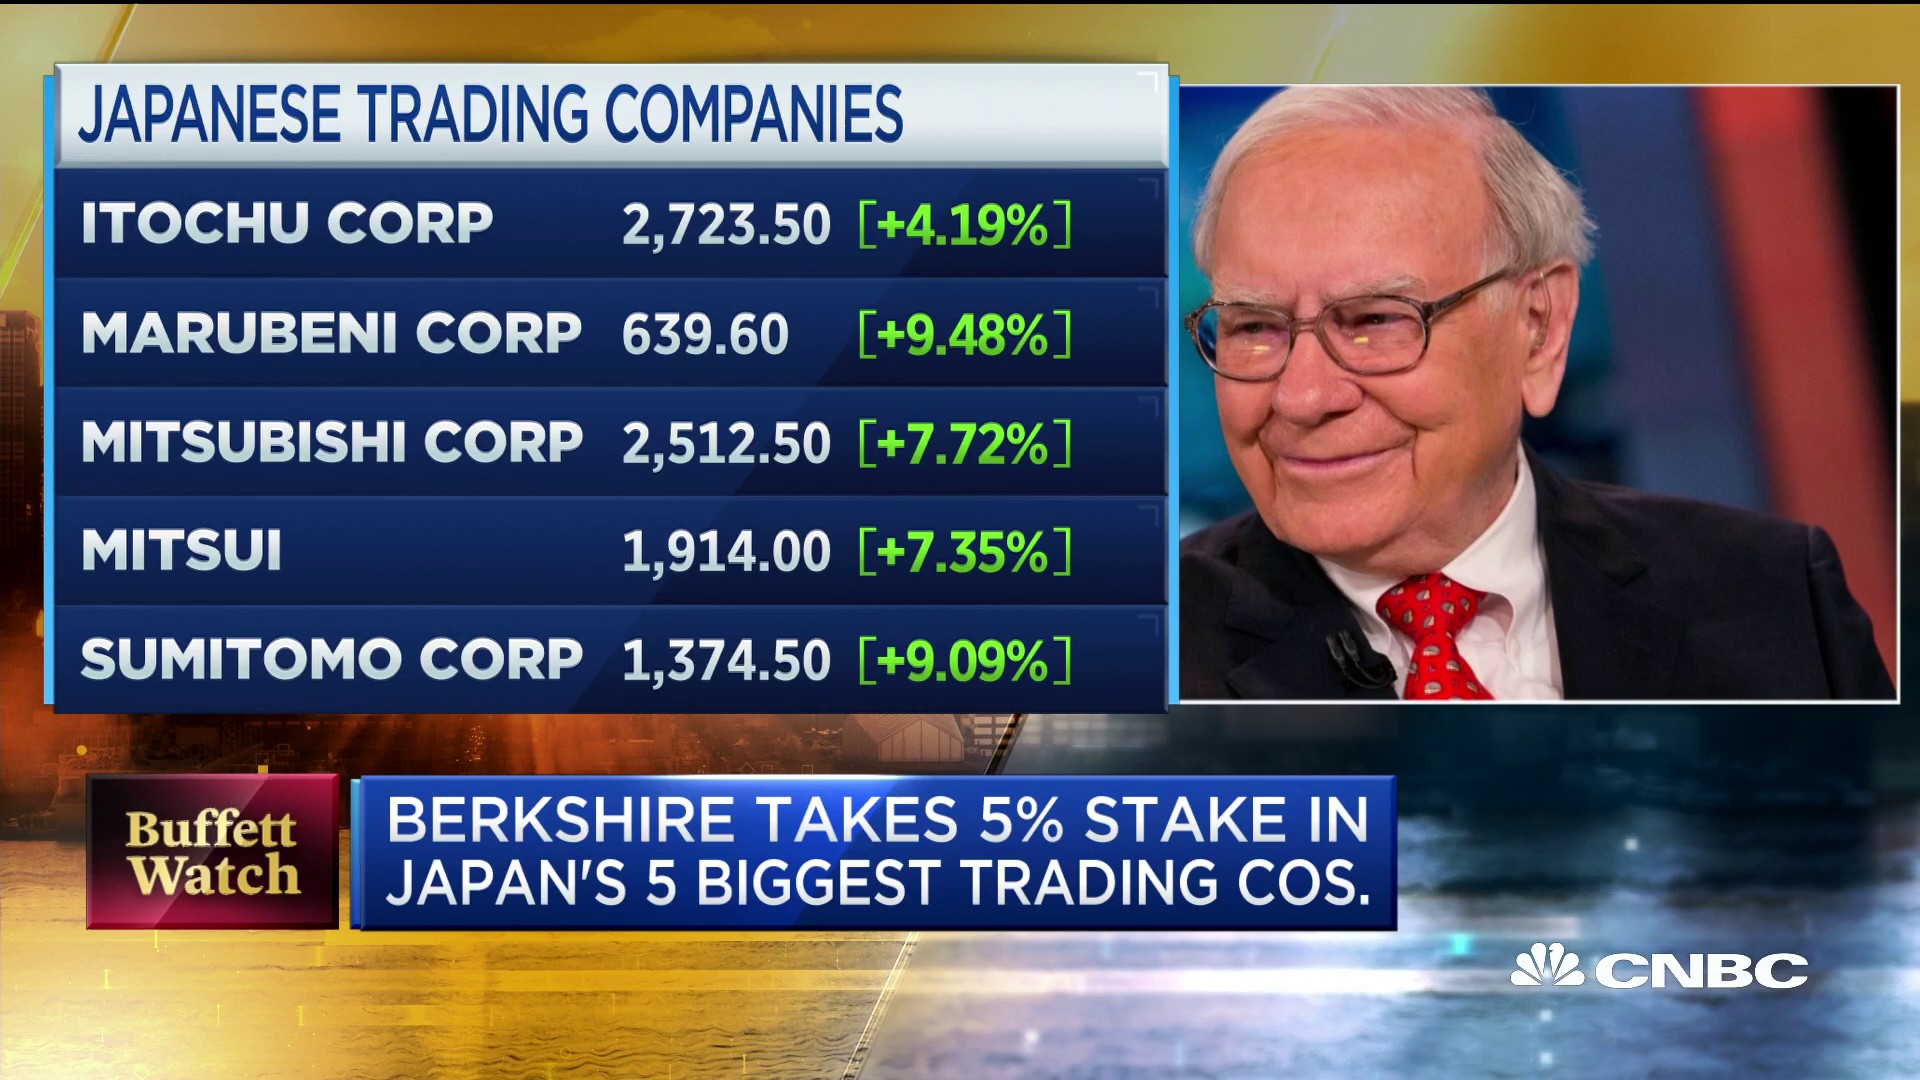 CNBC on Twitter: "Warren Buffett's Berkshire has acquired a slightly more than 5% stake in each of Japan's 5 biggest trading companies: Itochu Corp., Marubeni Corp., Mitsubishi Corp., Mitsui &amp; Co., and